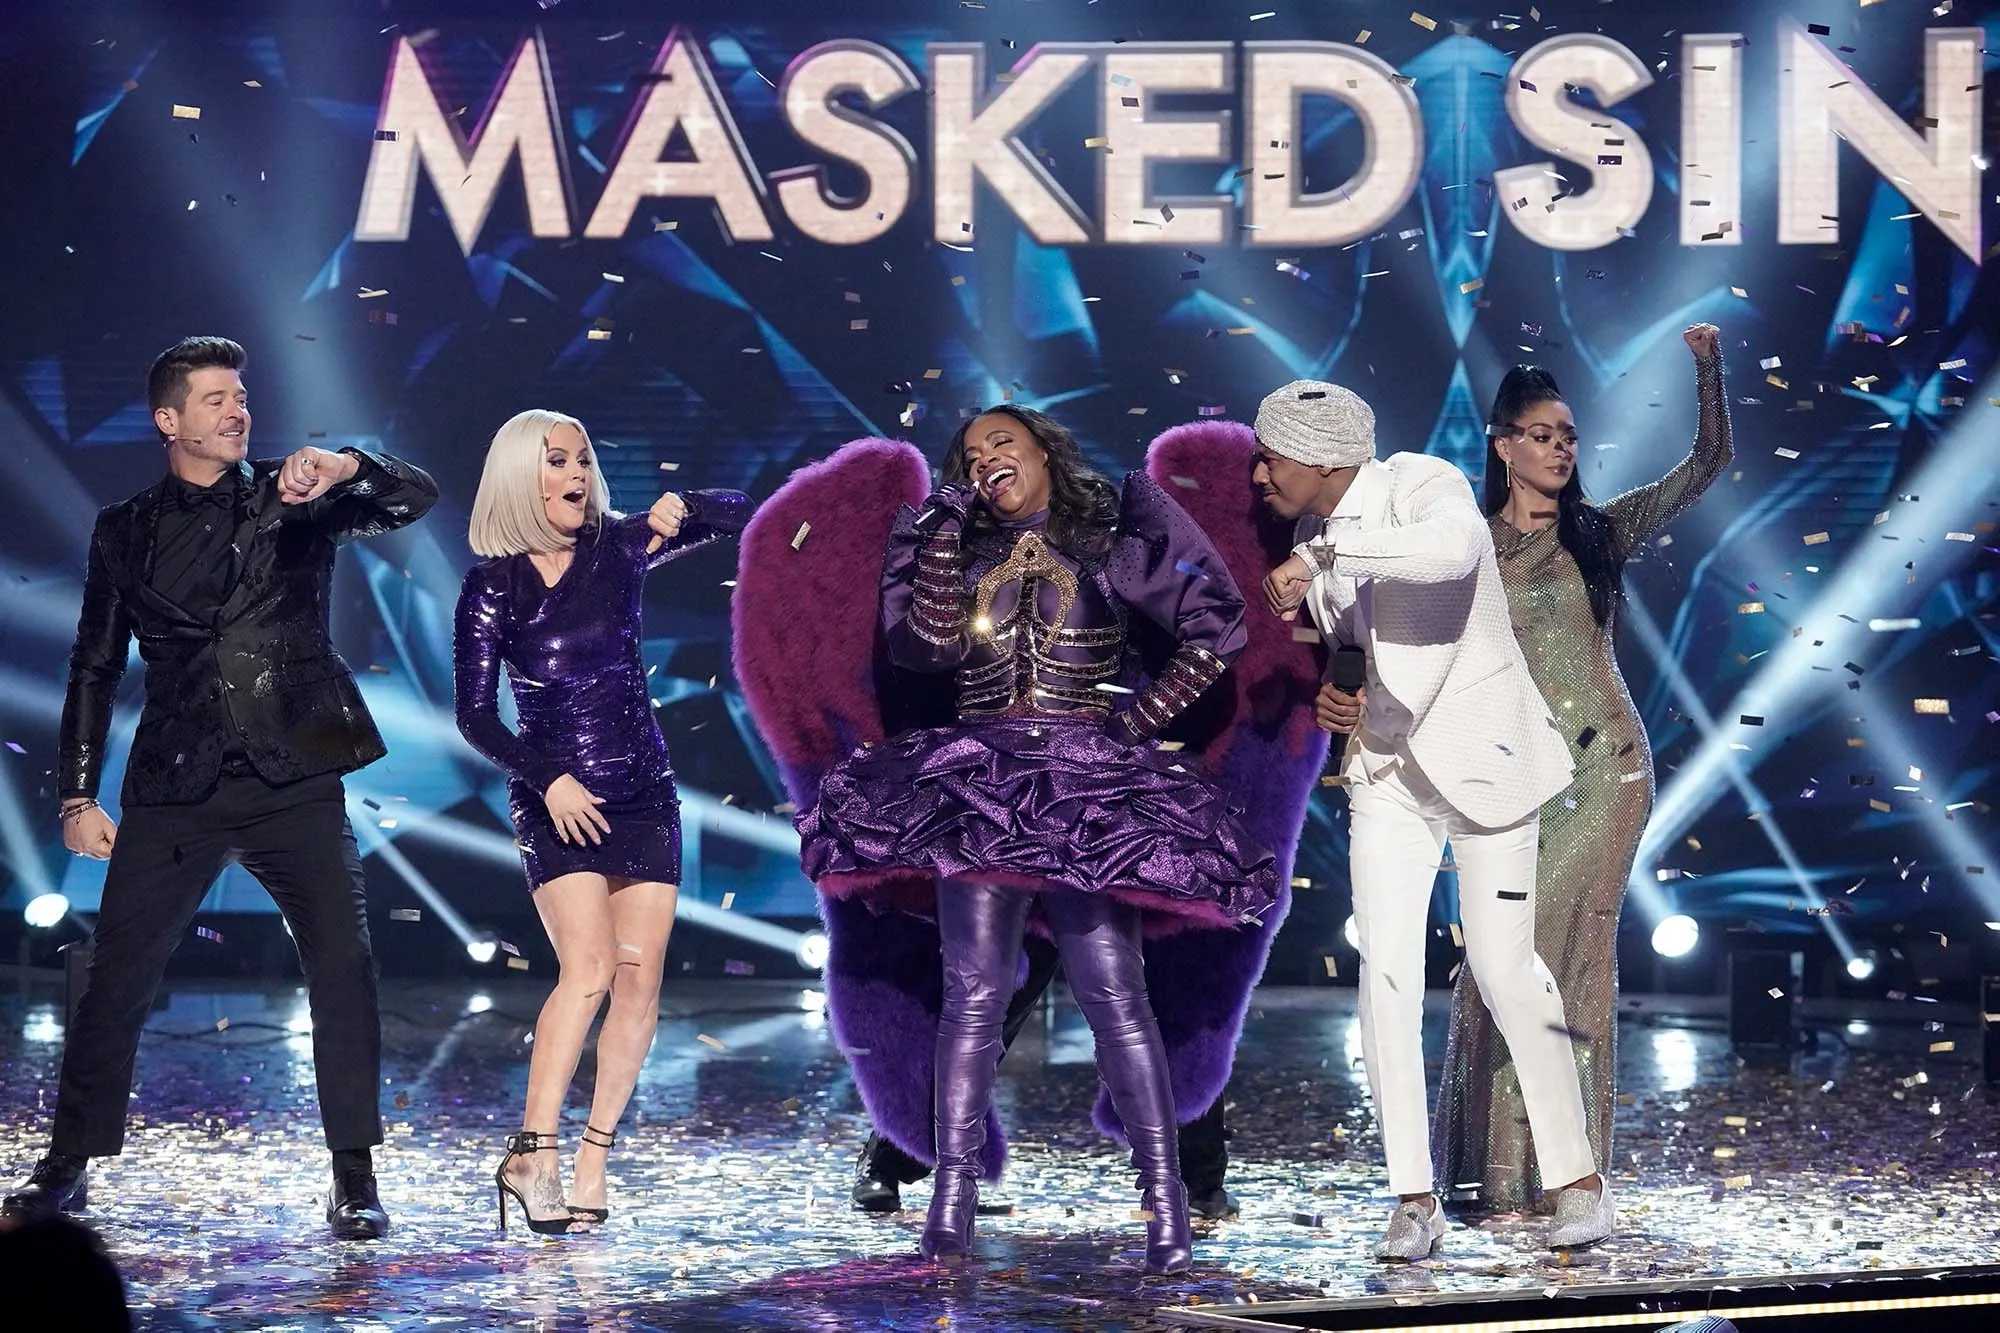 Did you know? This '80s icon is the mysterious Donut in The Masked Singer